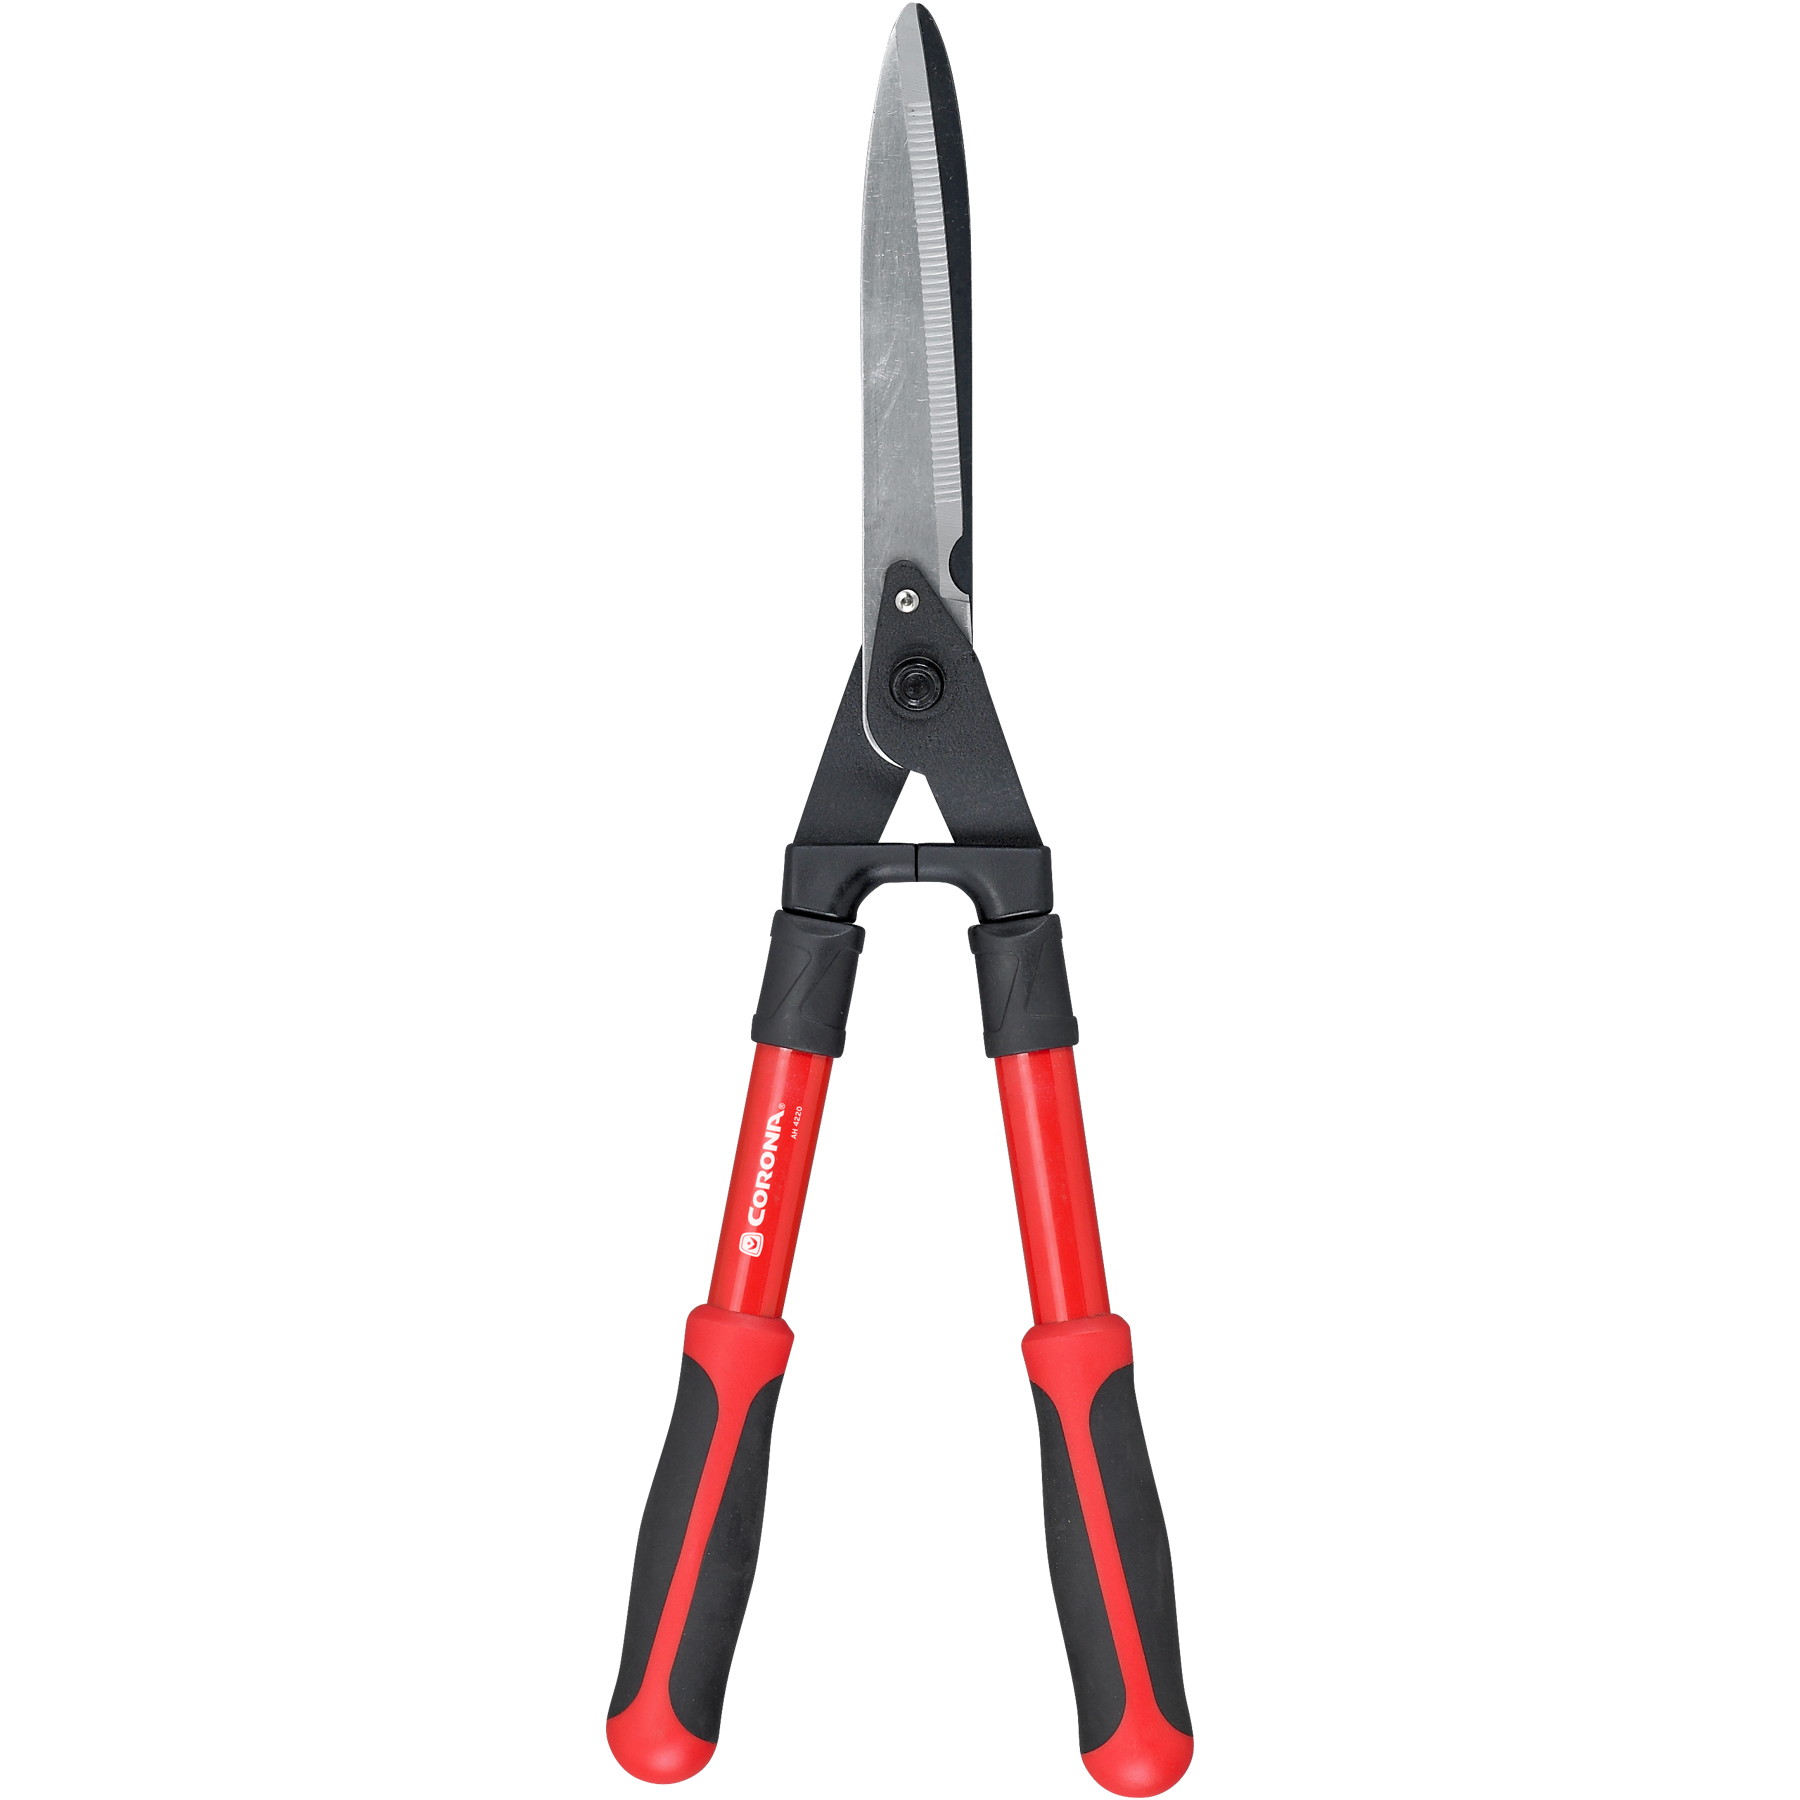 Corona Compound Action Hedge Shears - 9 Inch - image 1 of 2